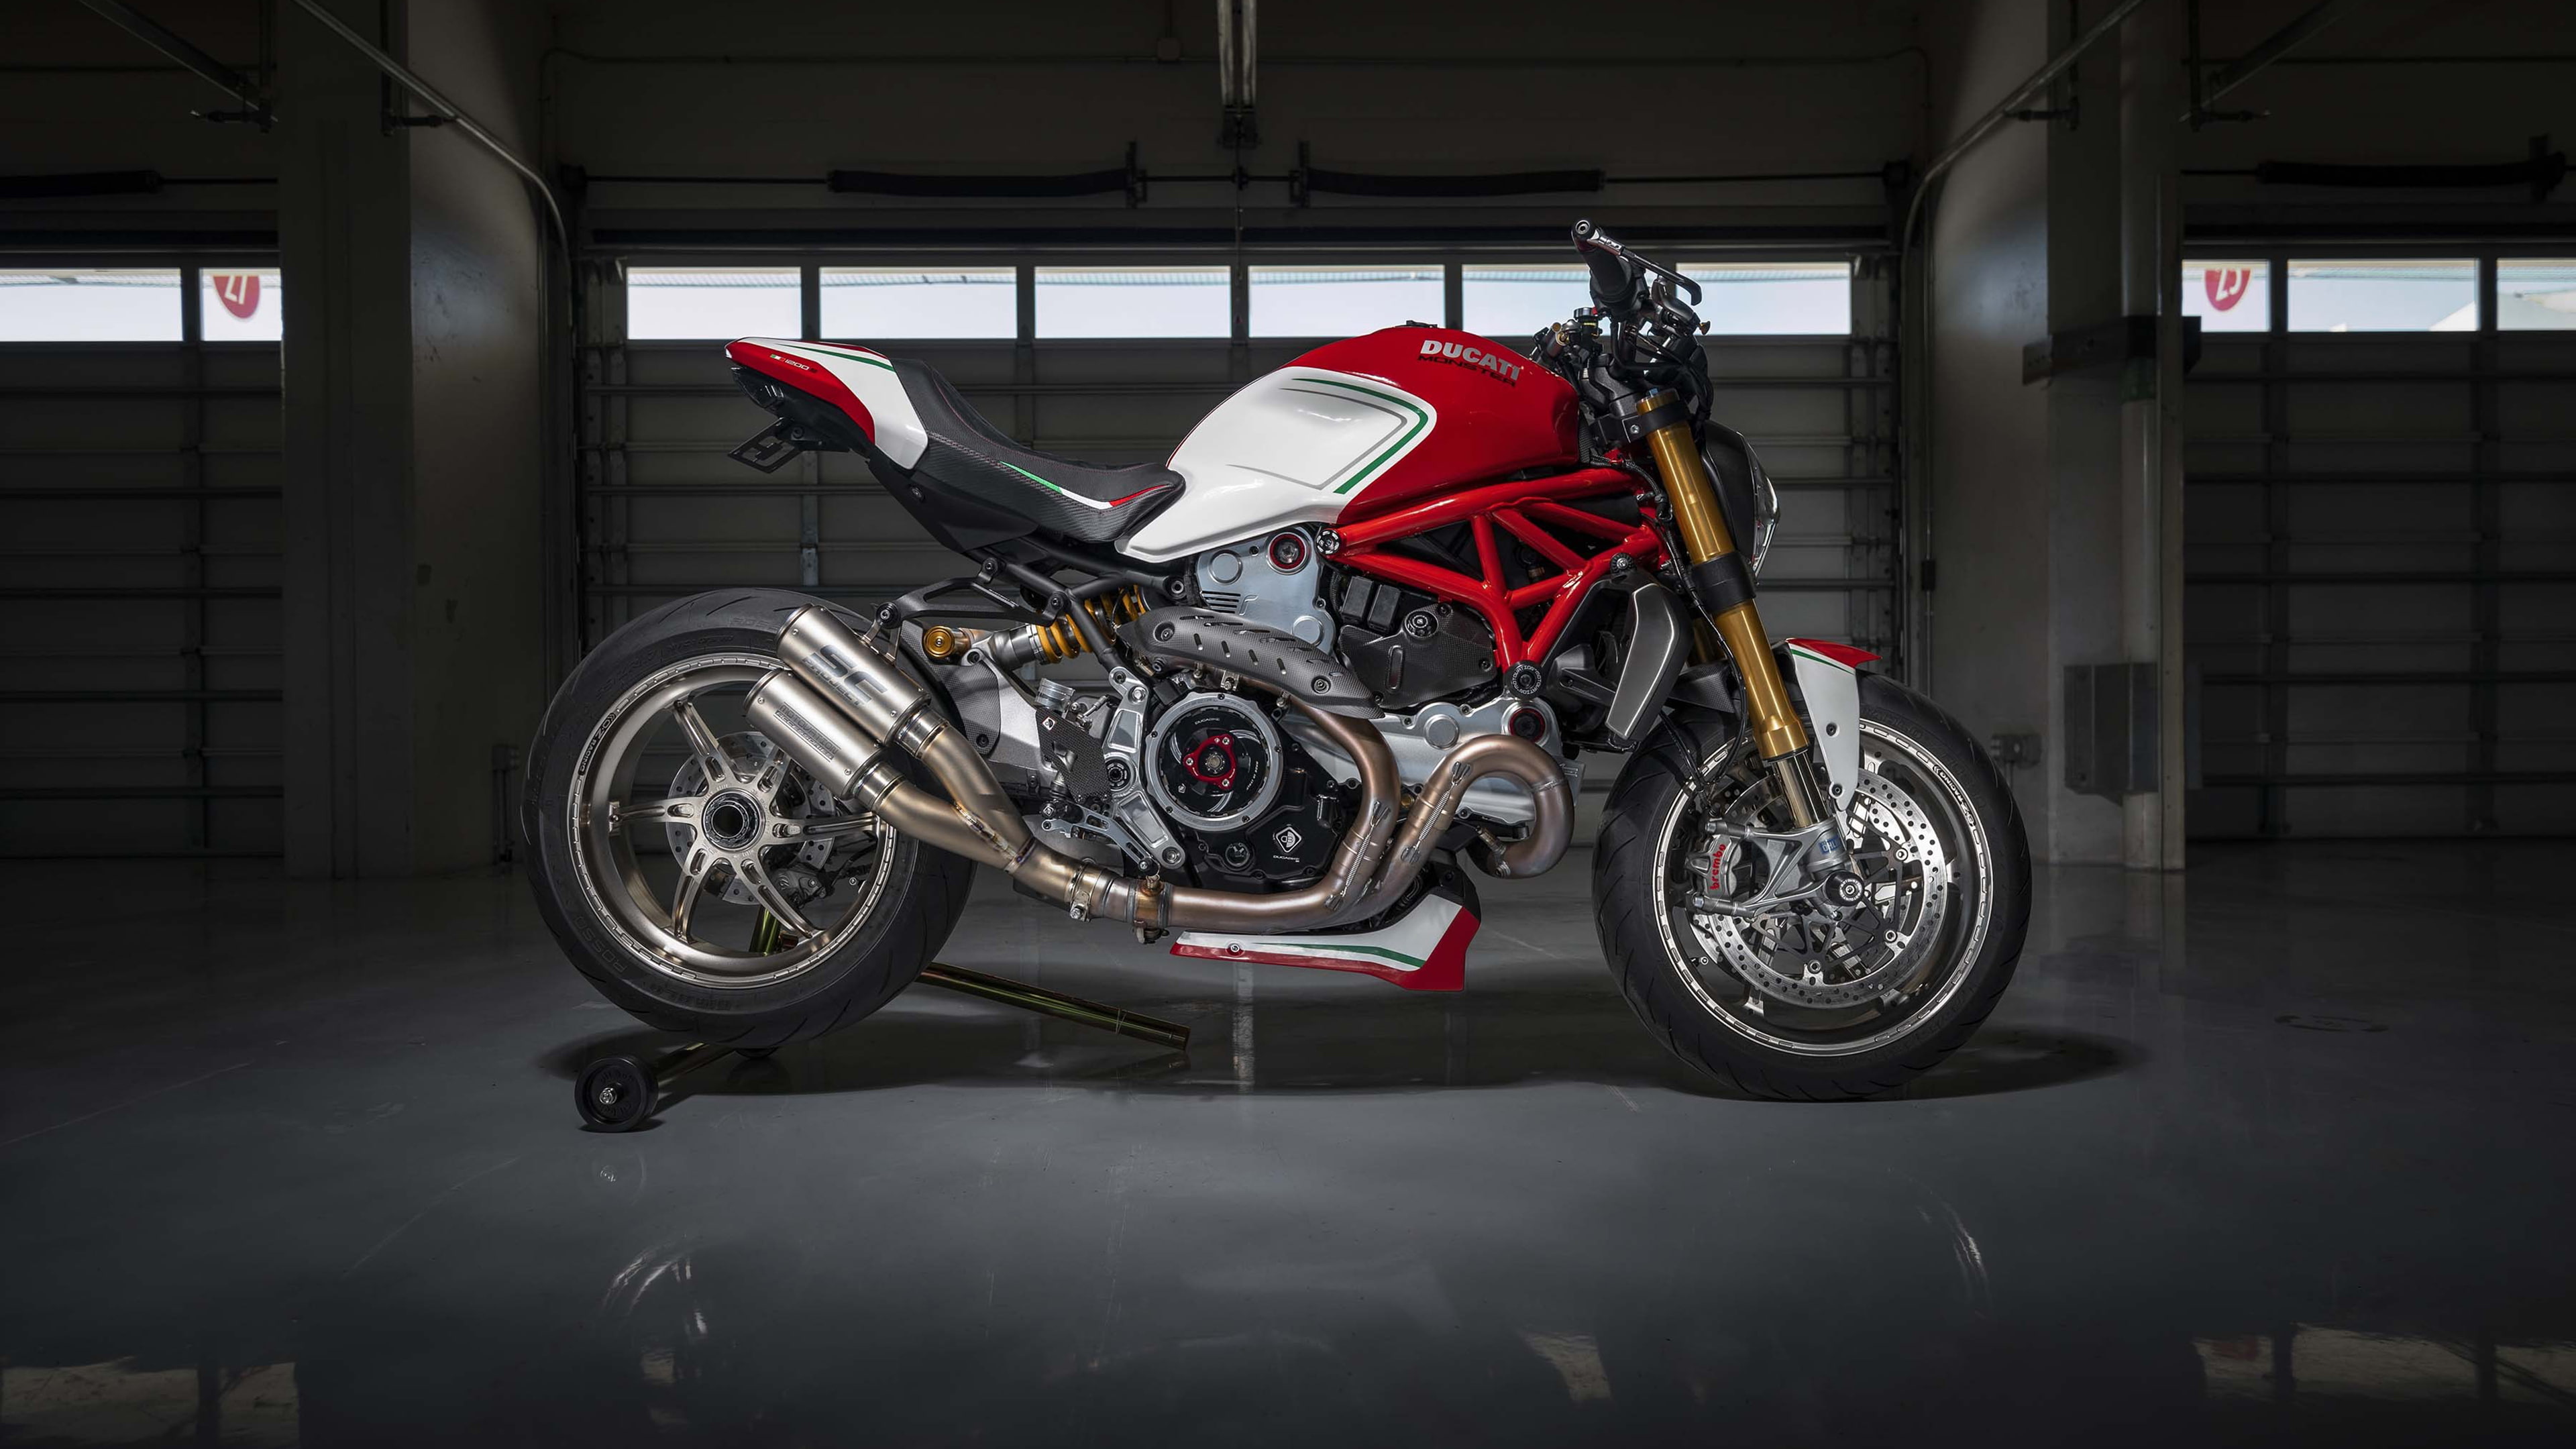 Ducati Monster 1200 Tricolore by Motovation 2019 4K